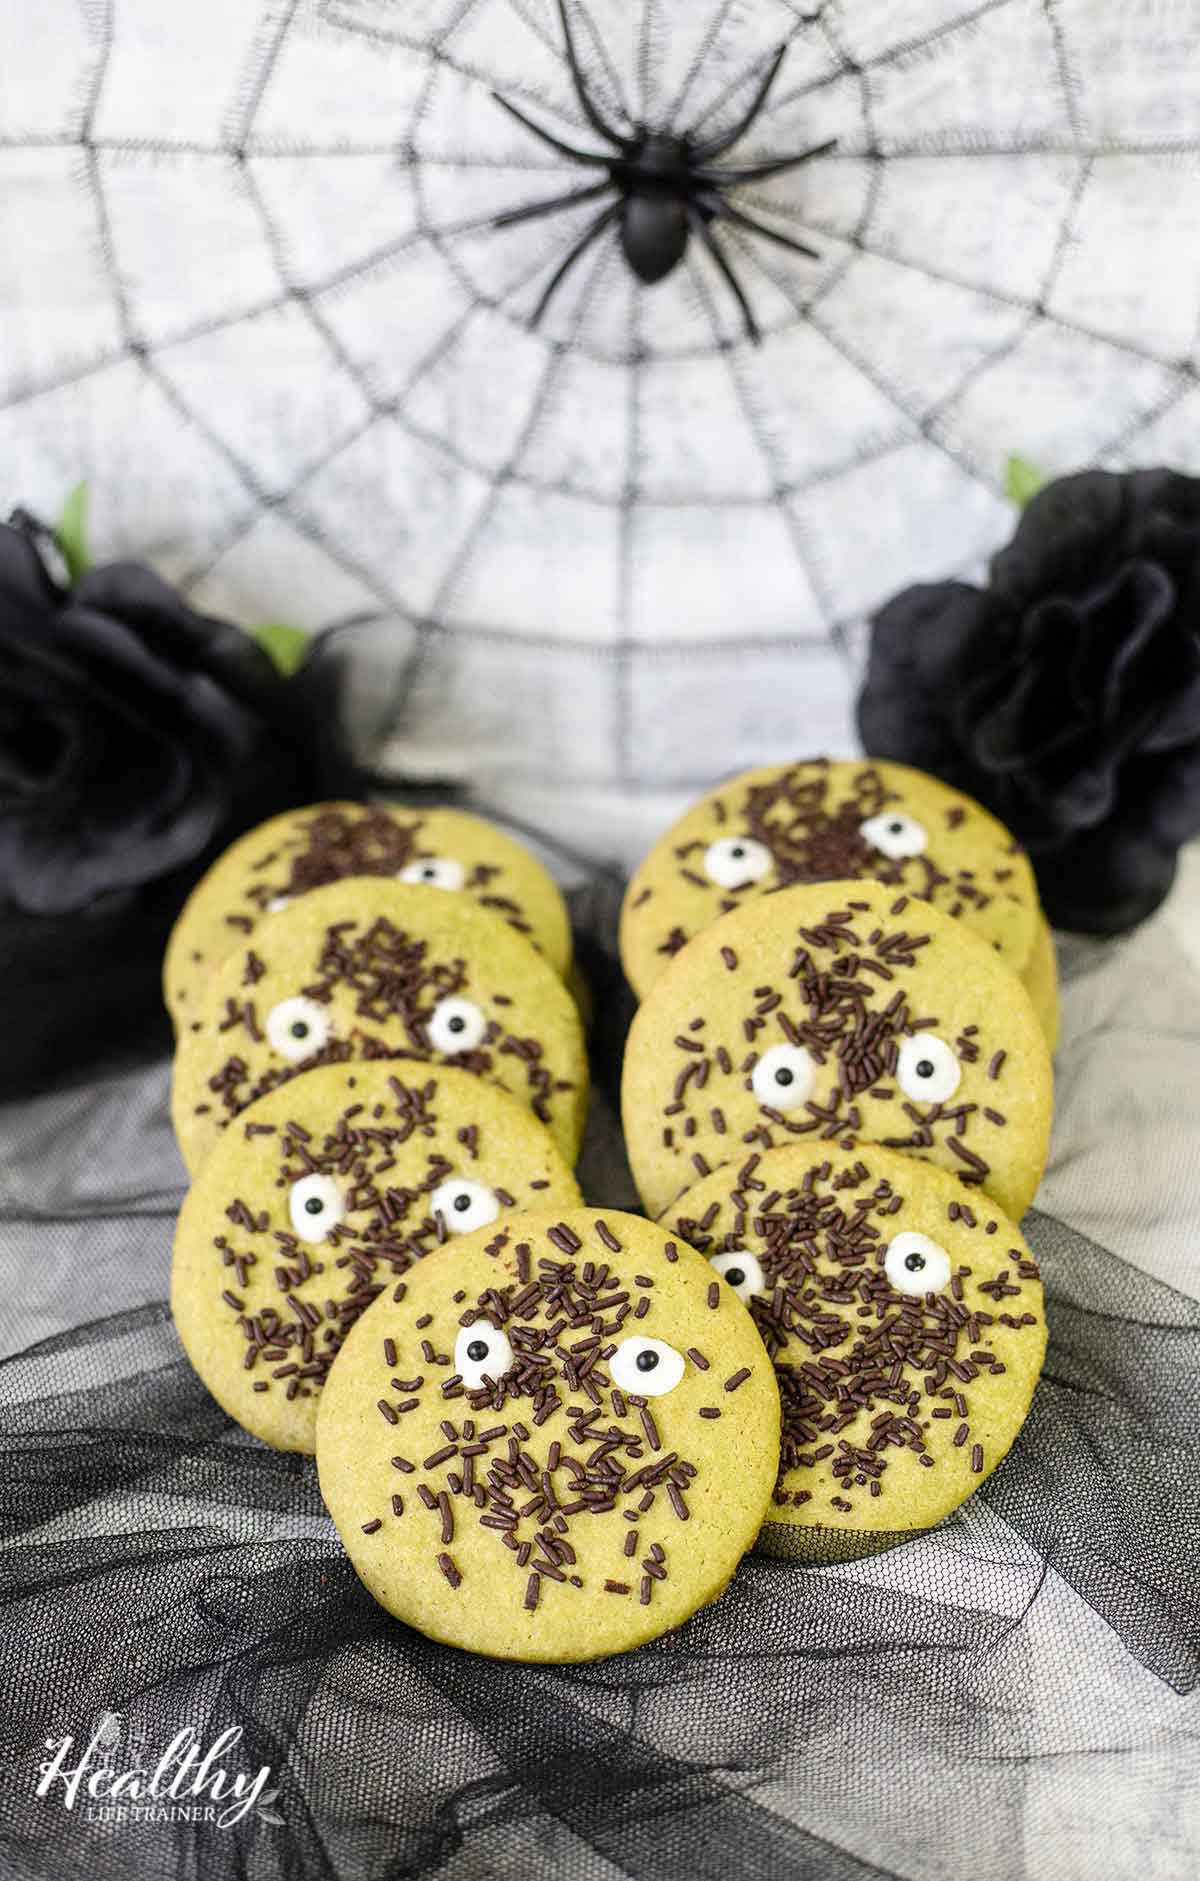 Cute halloween cookies with matcha, candy eyes and chocolate sprinkles.